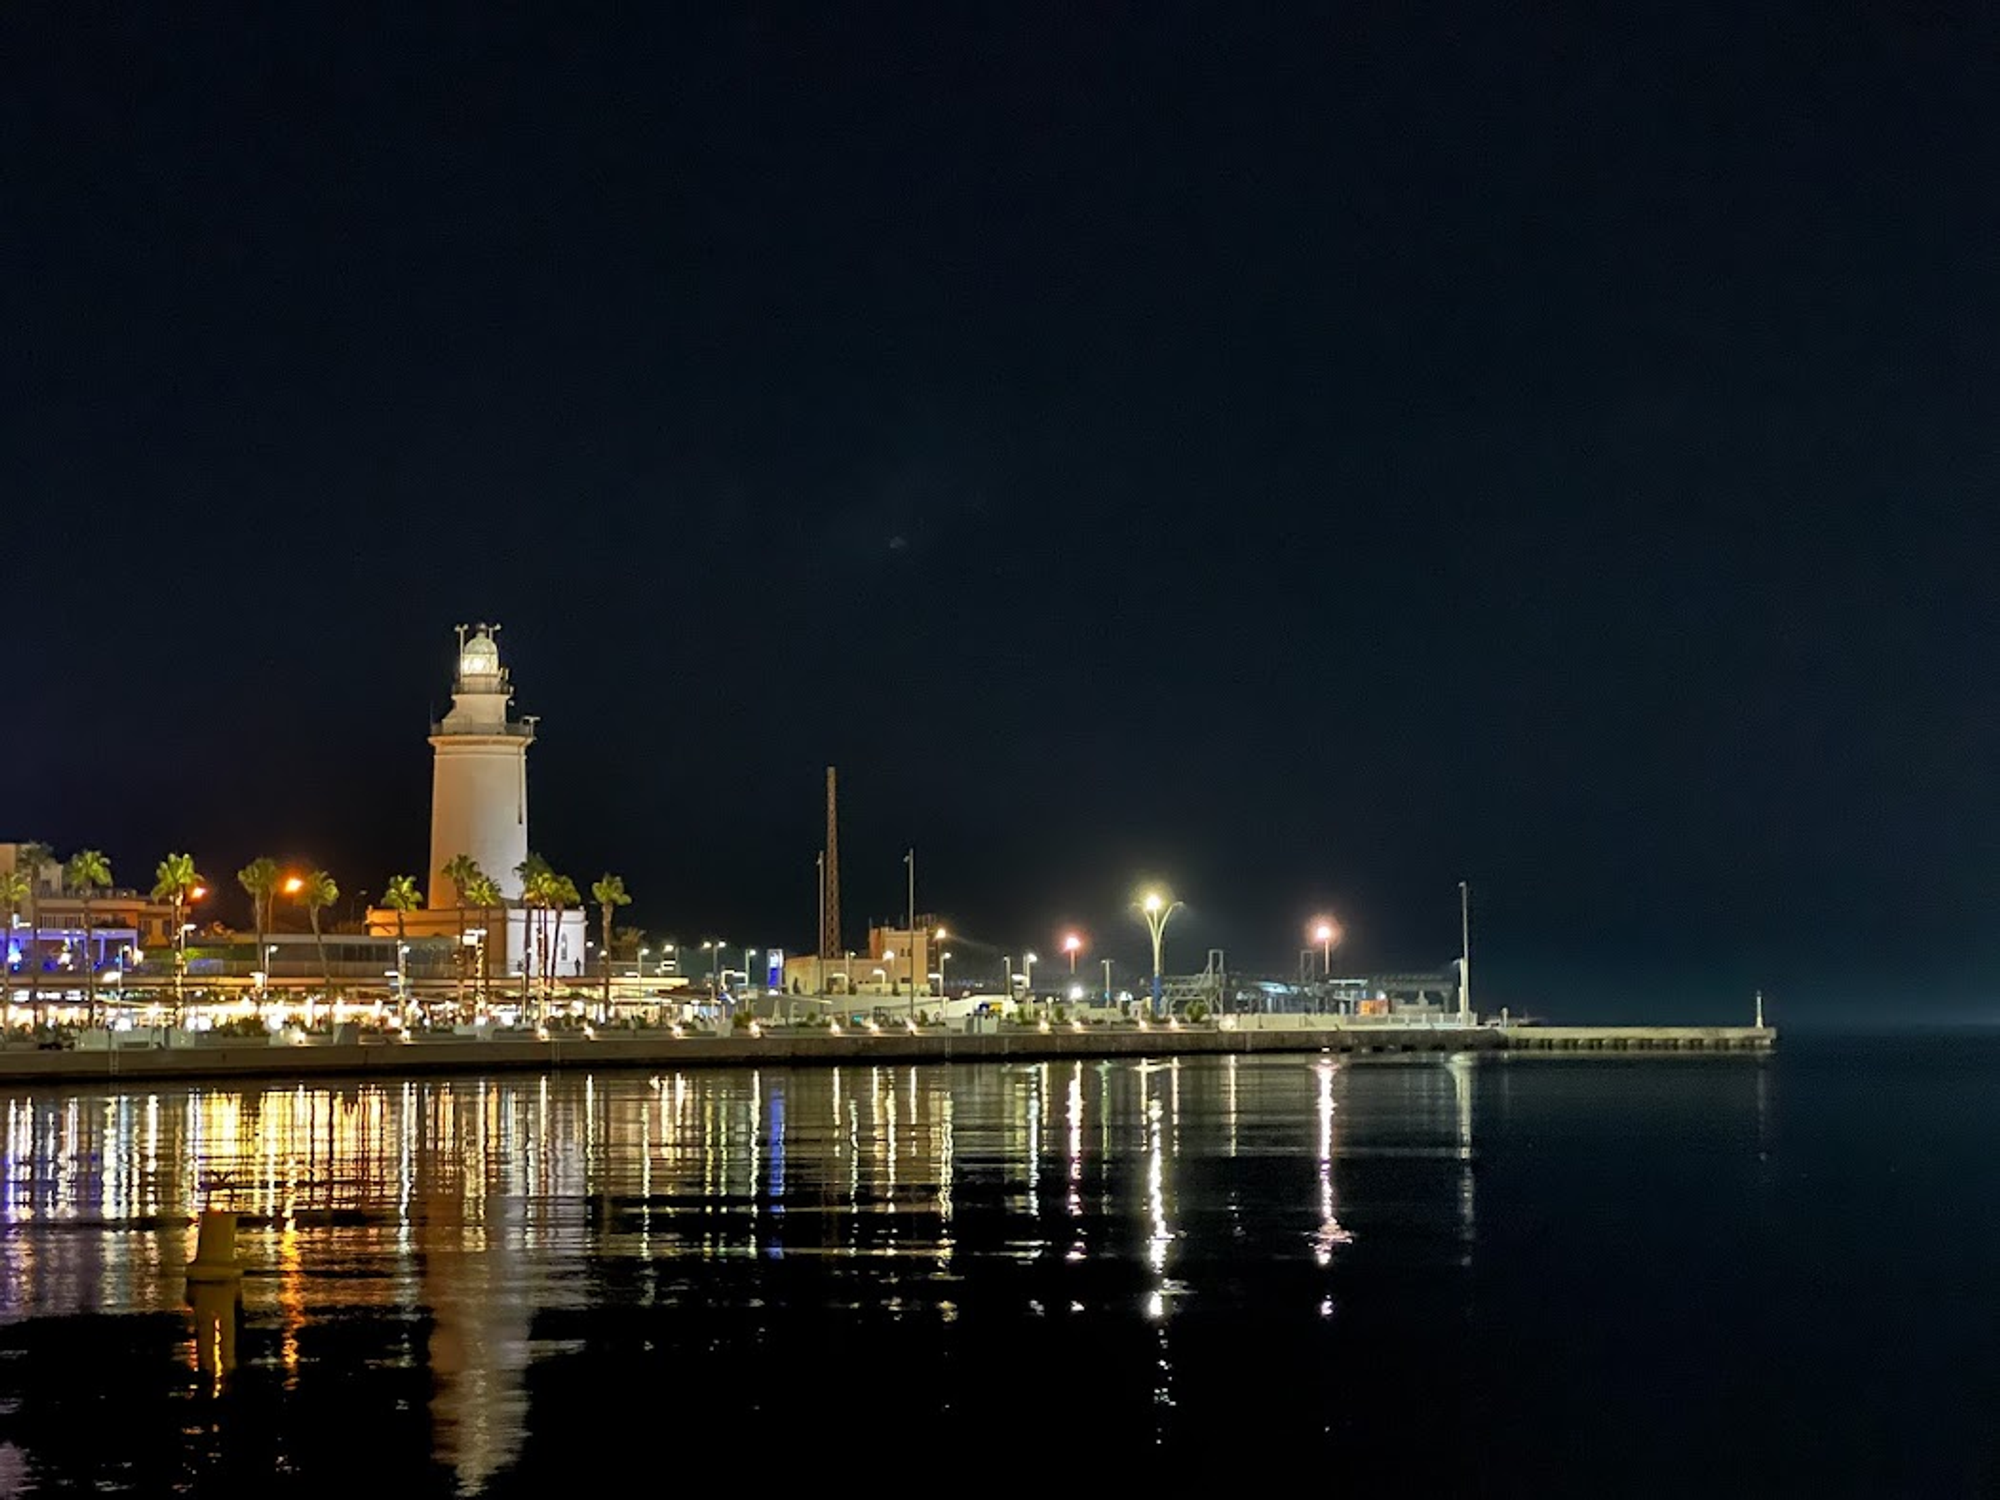 The lighthouse and lights along Muelle Uno